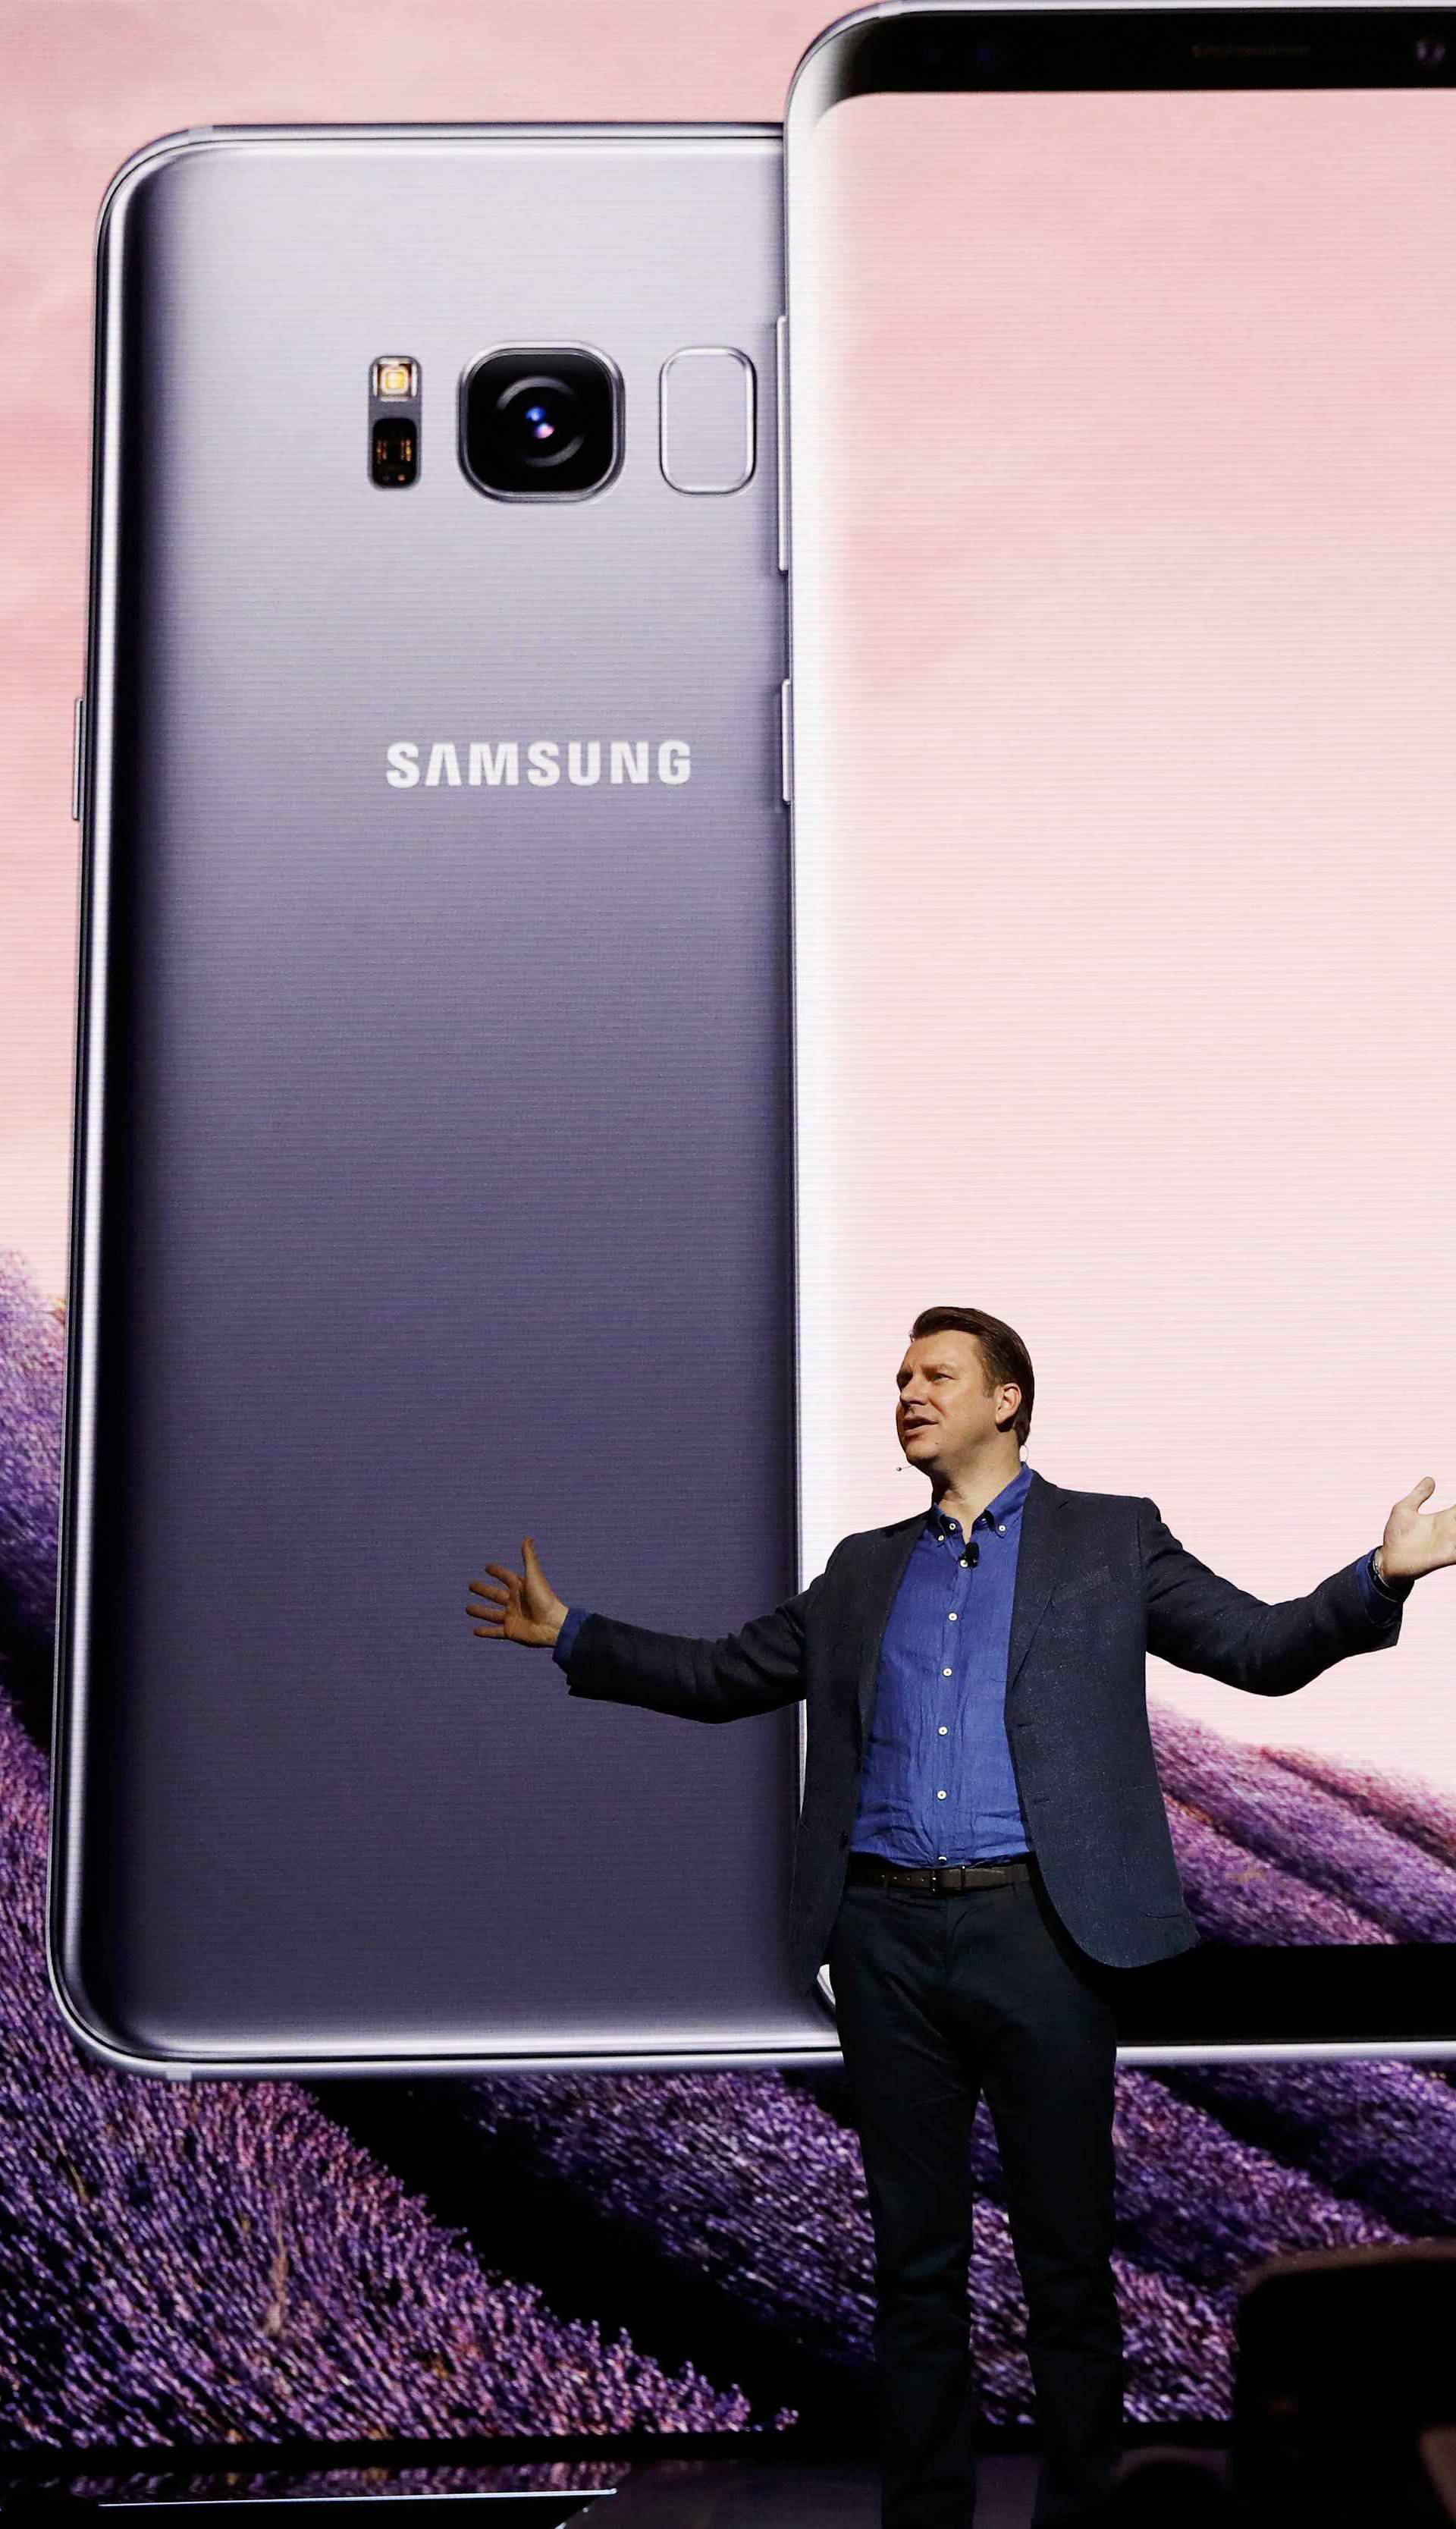 Justin Denison, Samsung senior vice president of Product Strategy, introduces the Galaxy S8 and S8+ smartphones during the Samsung Unpacked event in New York City